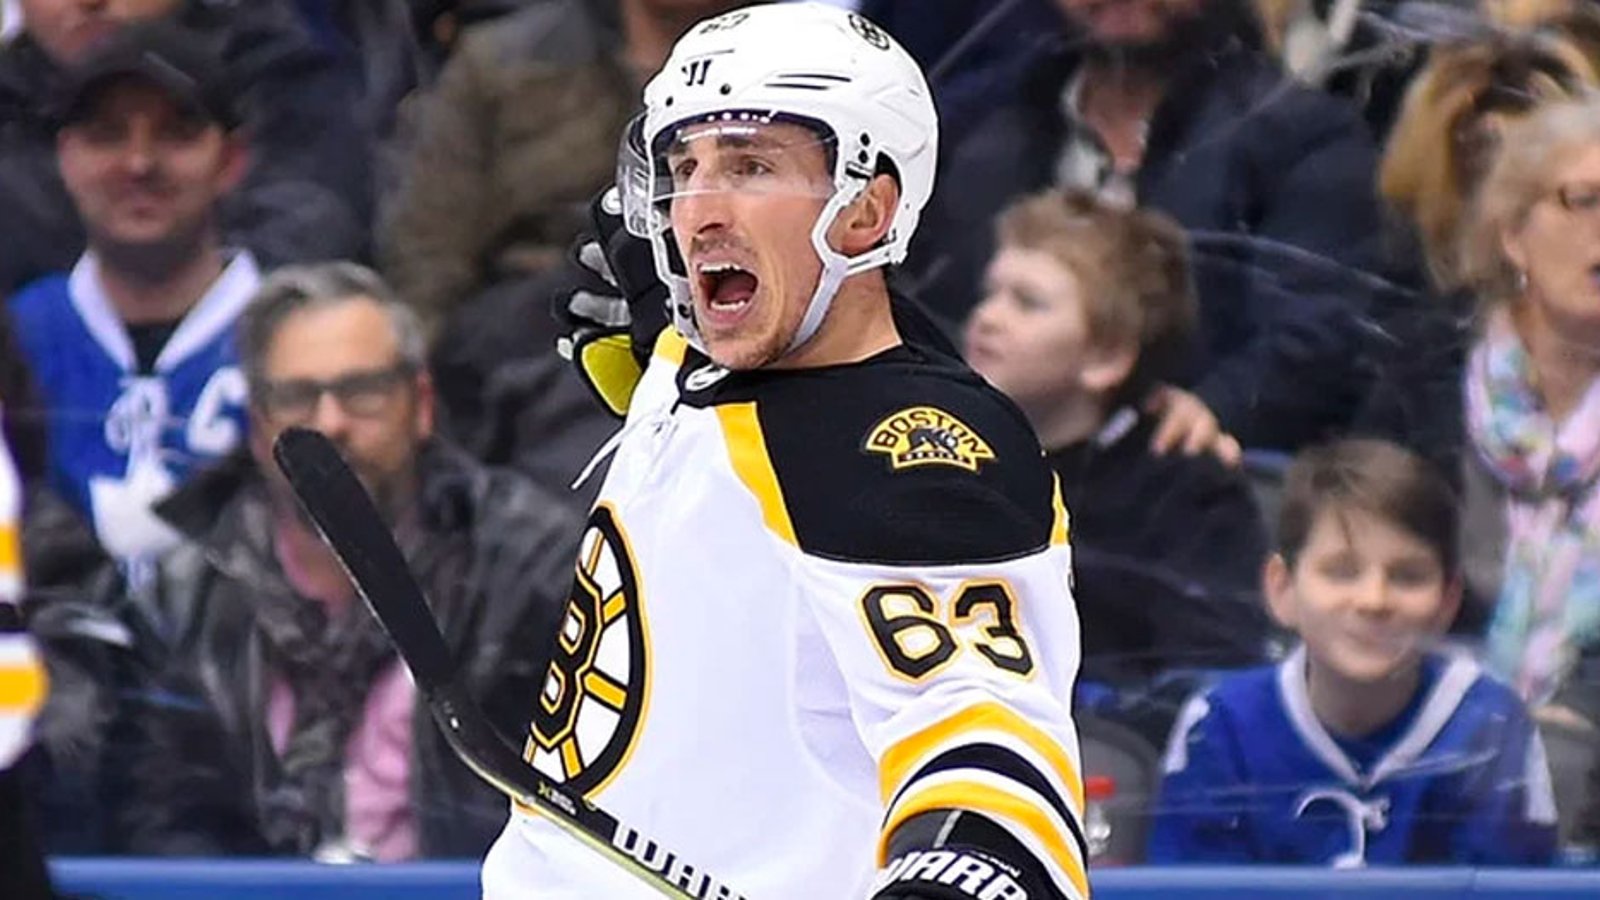 Marchand breaks Bruins fans' hearts, admits that deep down he's actually a Leafs fan